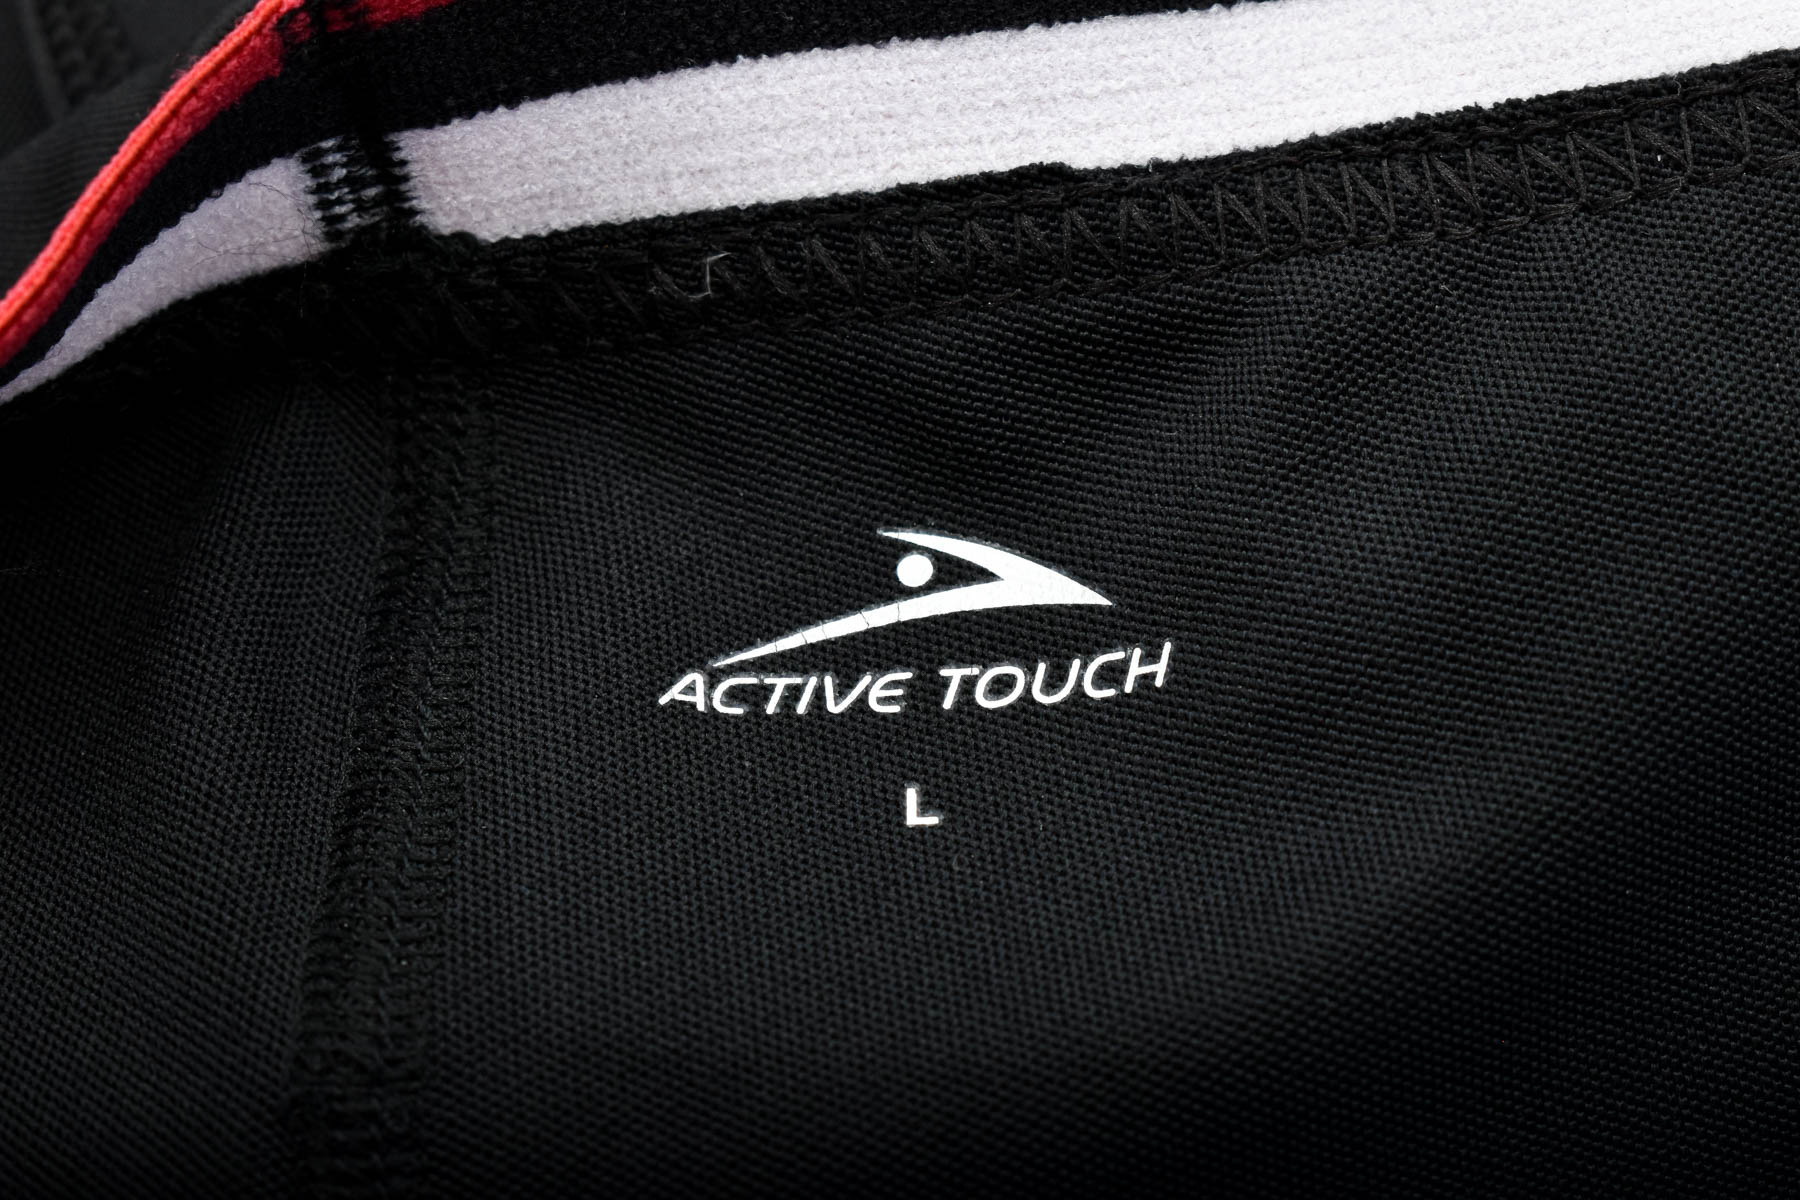 Leggings - Active Touch - 2